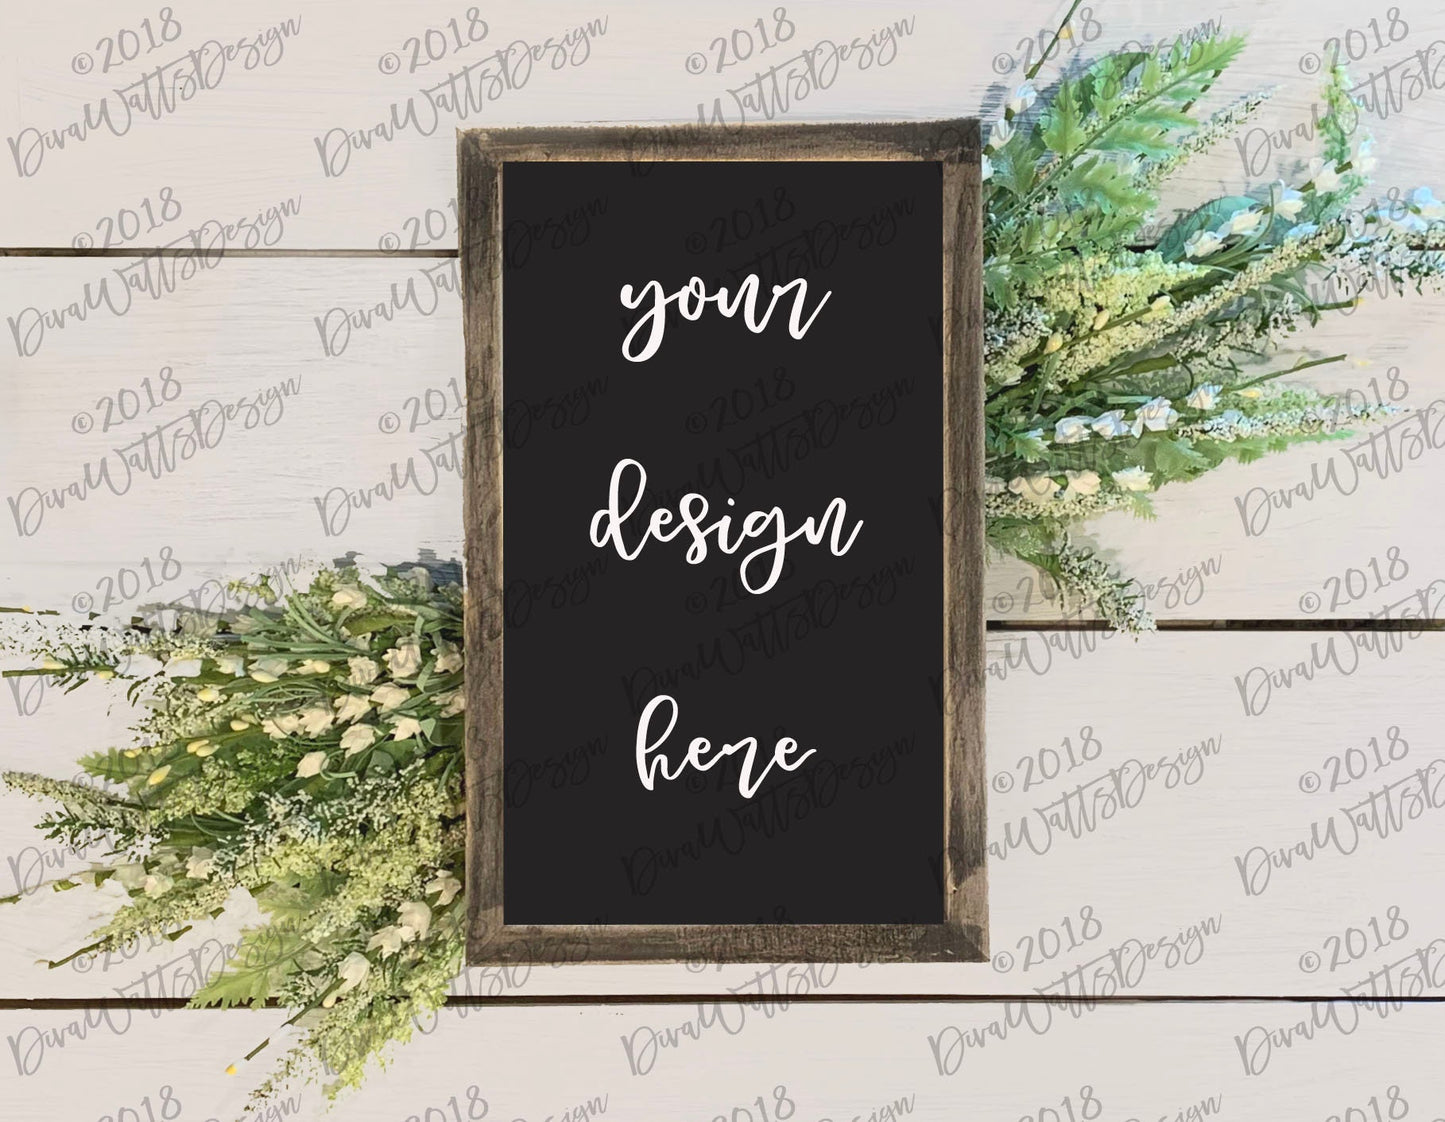 Mock-Up Framed Sign Template Set | Set of 4 JPG Files with White and Black Options | Farmhouse Styled Photos | Instant Download